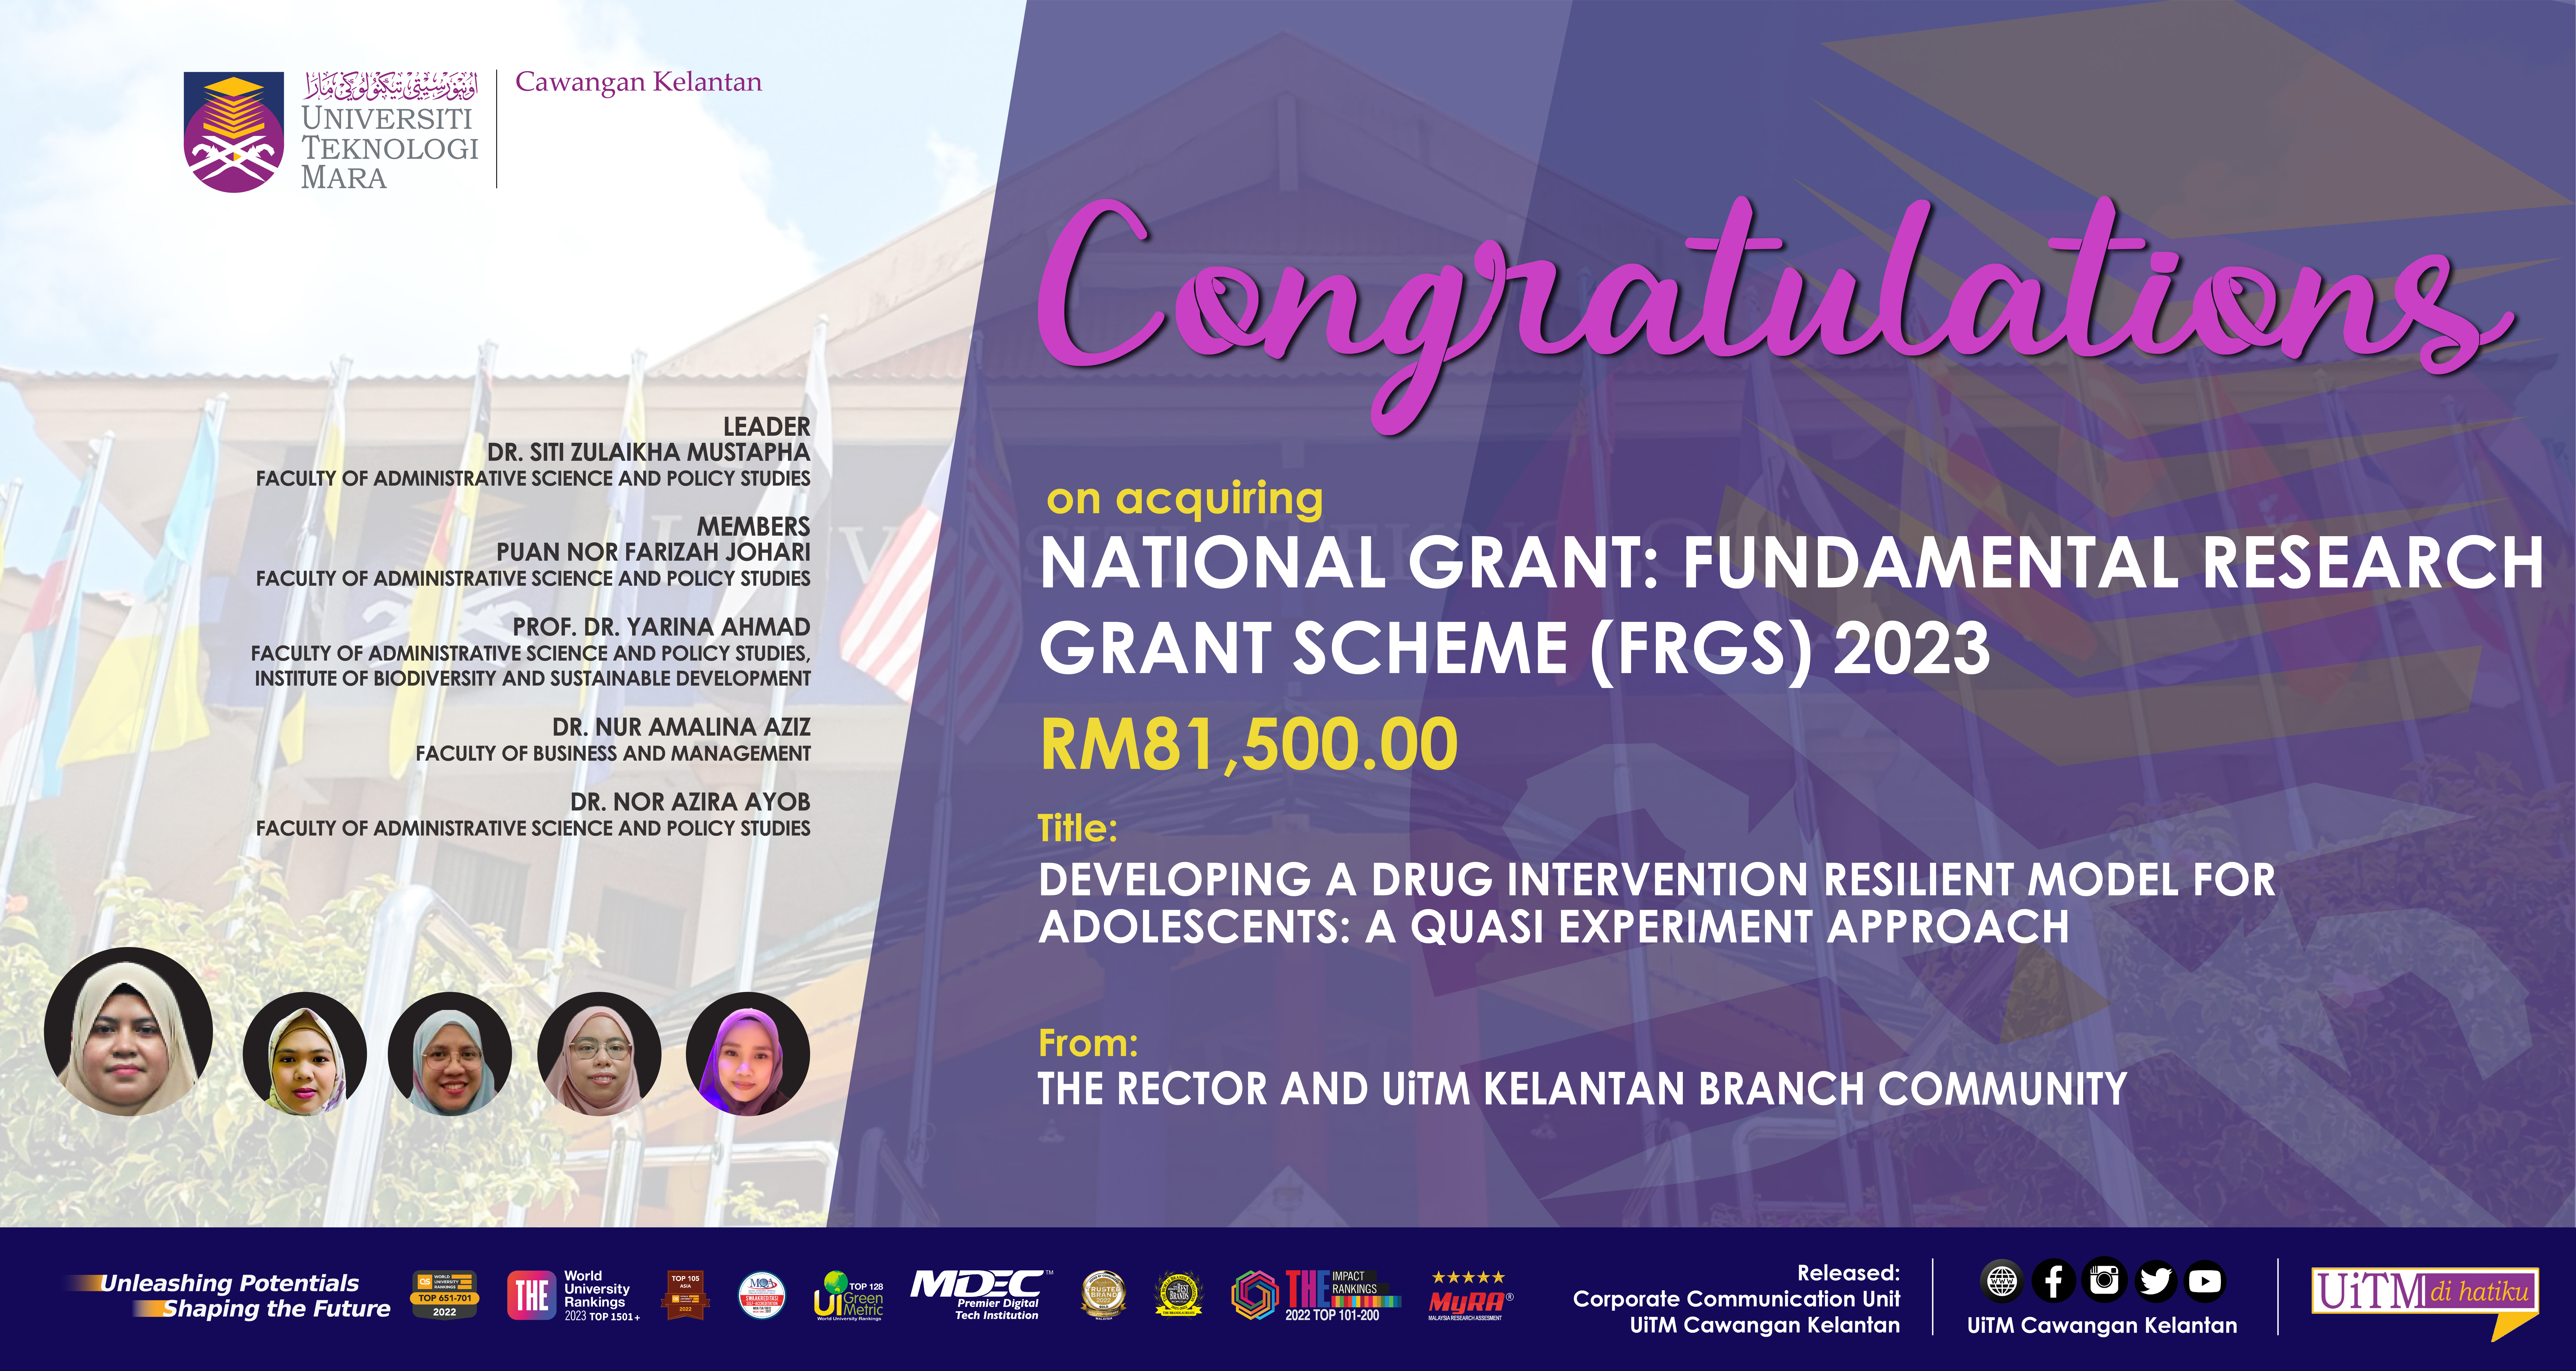 Congratulations!!! National Grant: Fundamental Research Grant Scheme (FRGS) 2023 (Developing a Drug Intervention Resilient Model For Adolescents: A Quasi Experiment Approach)